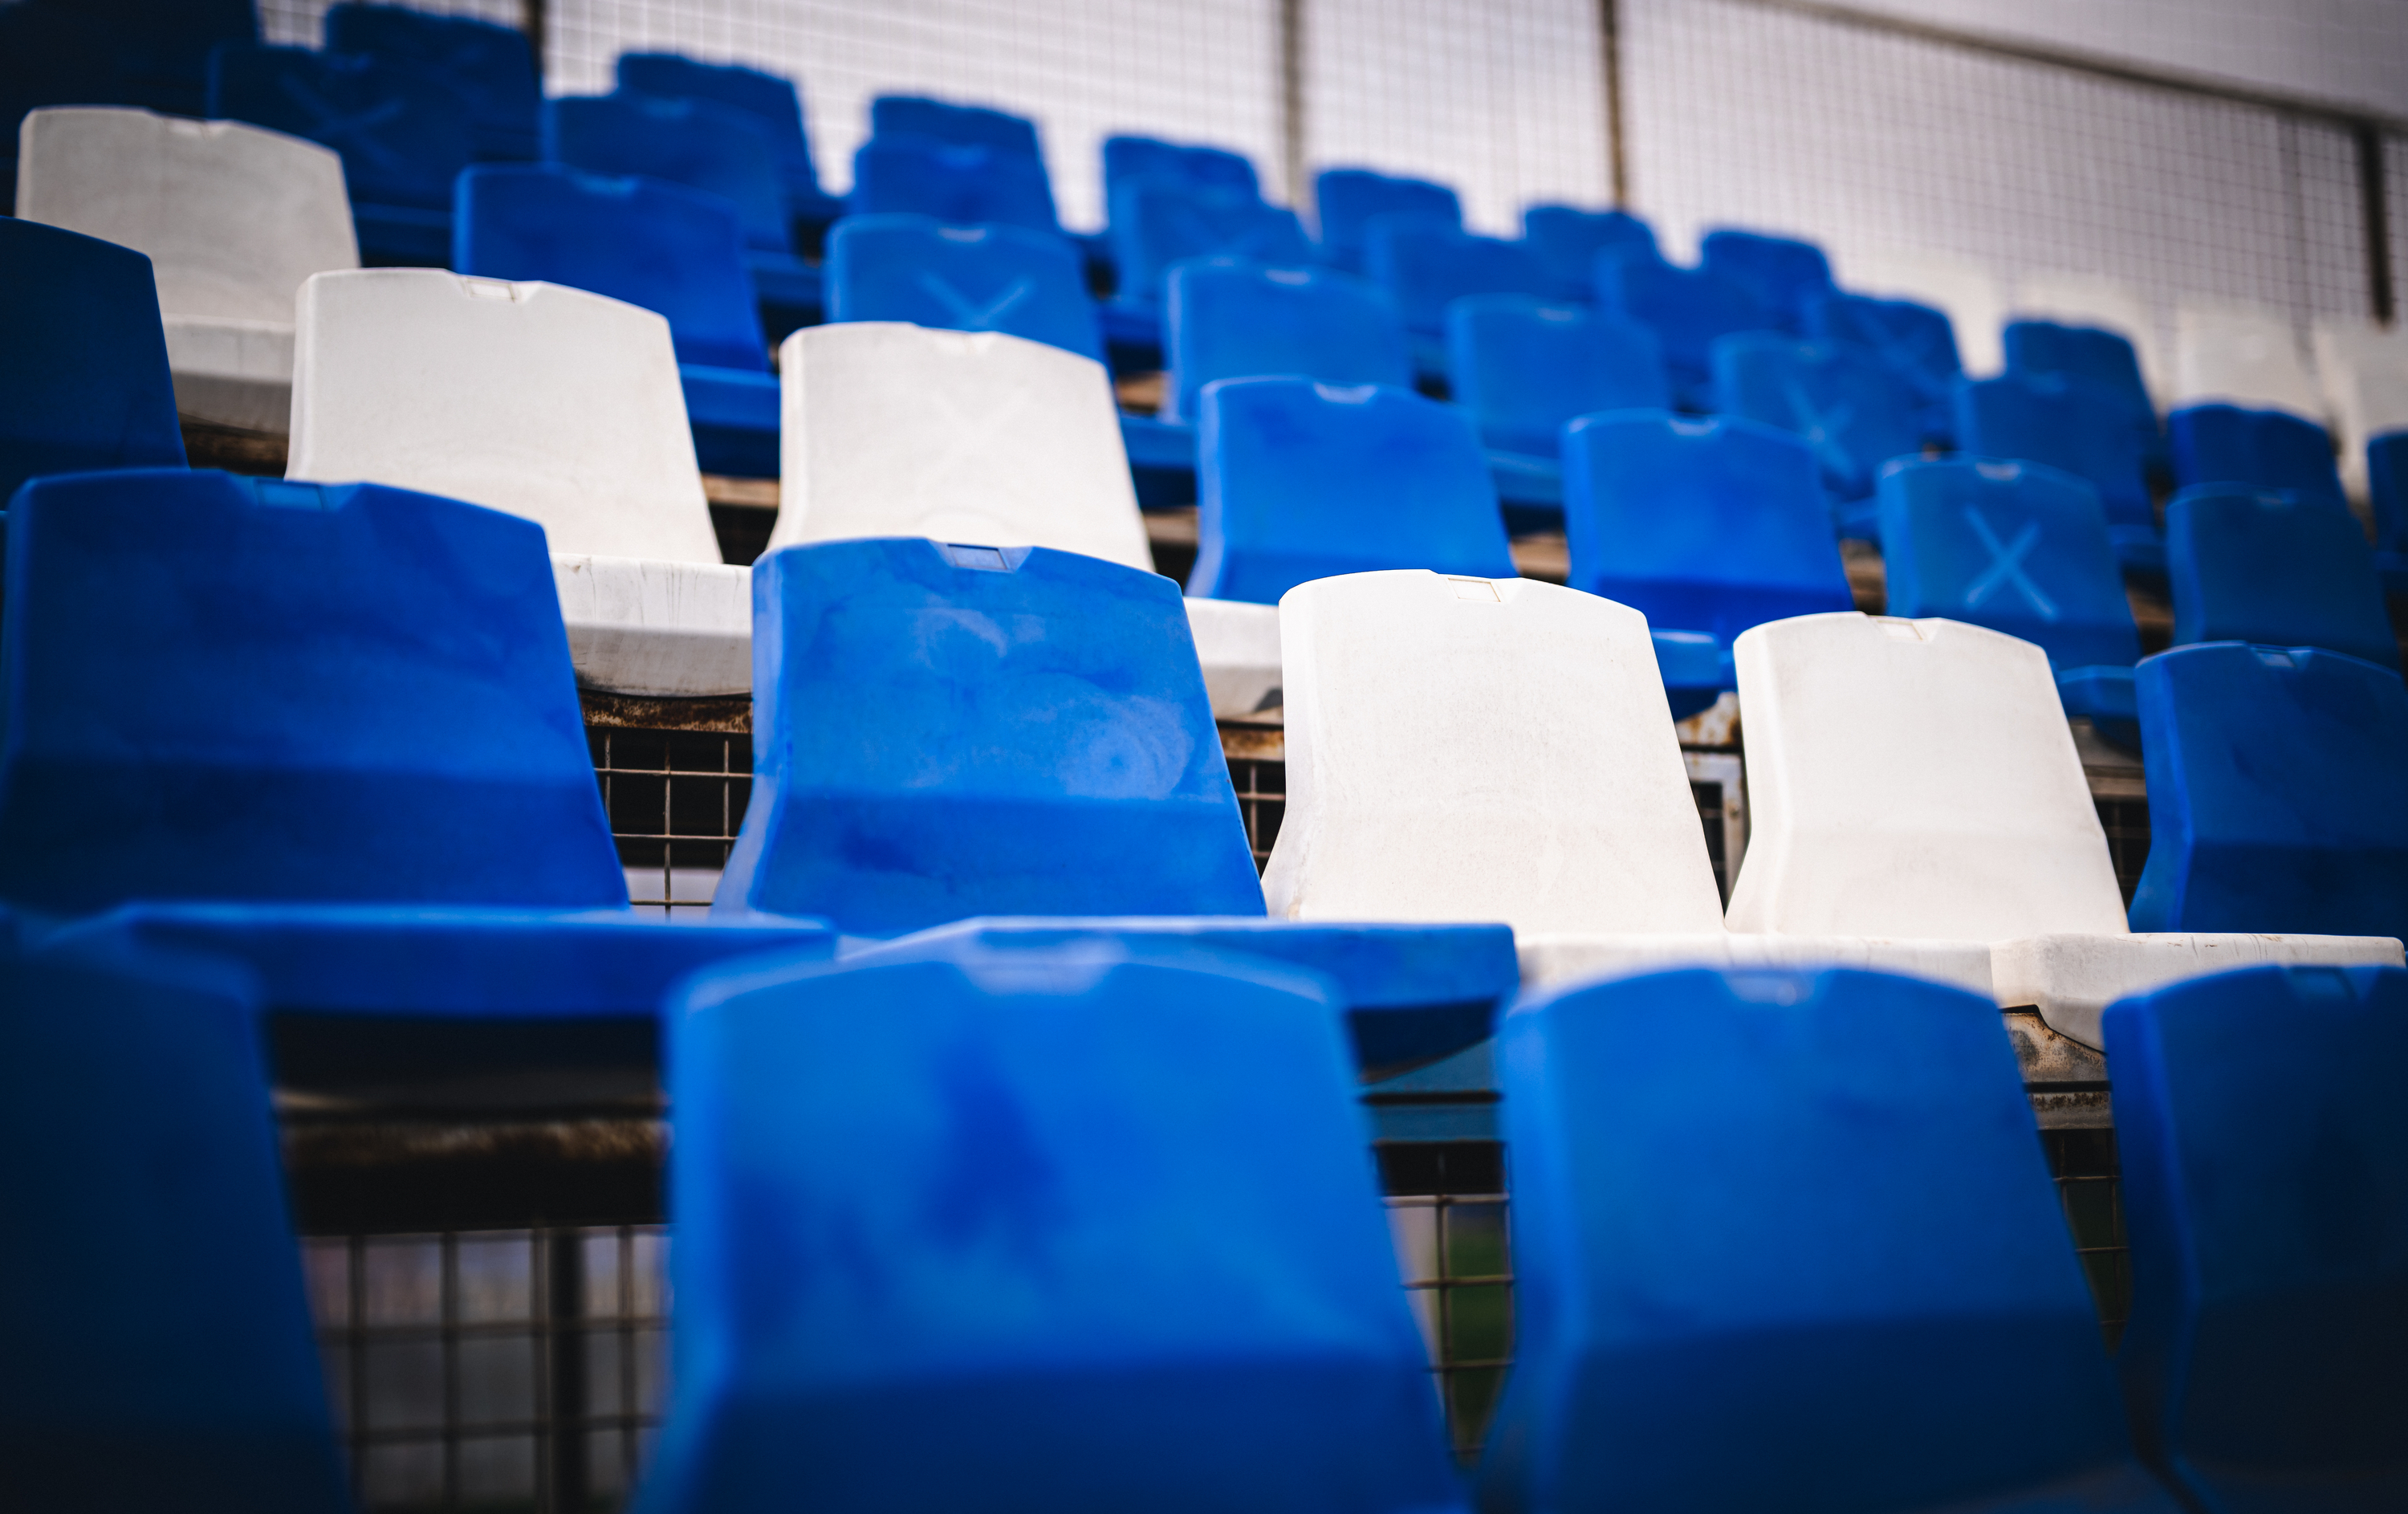 The blue and white stadium seats.